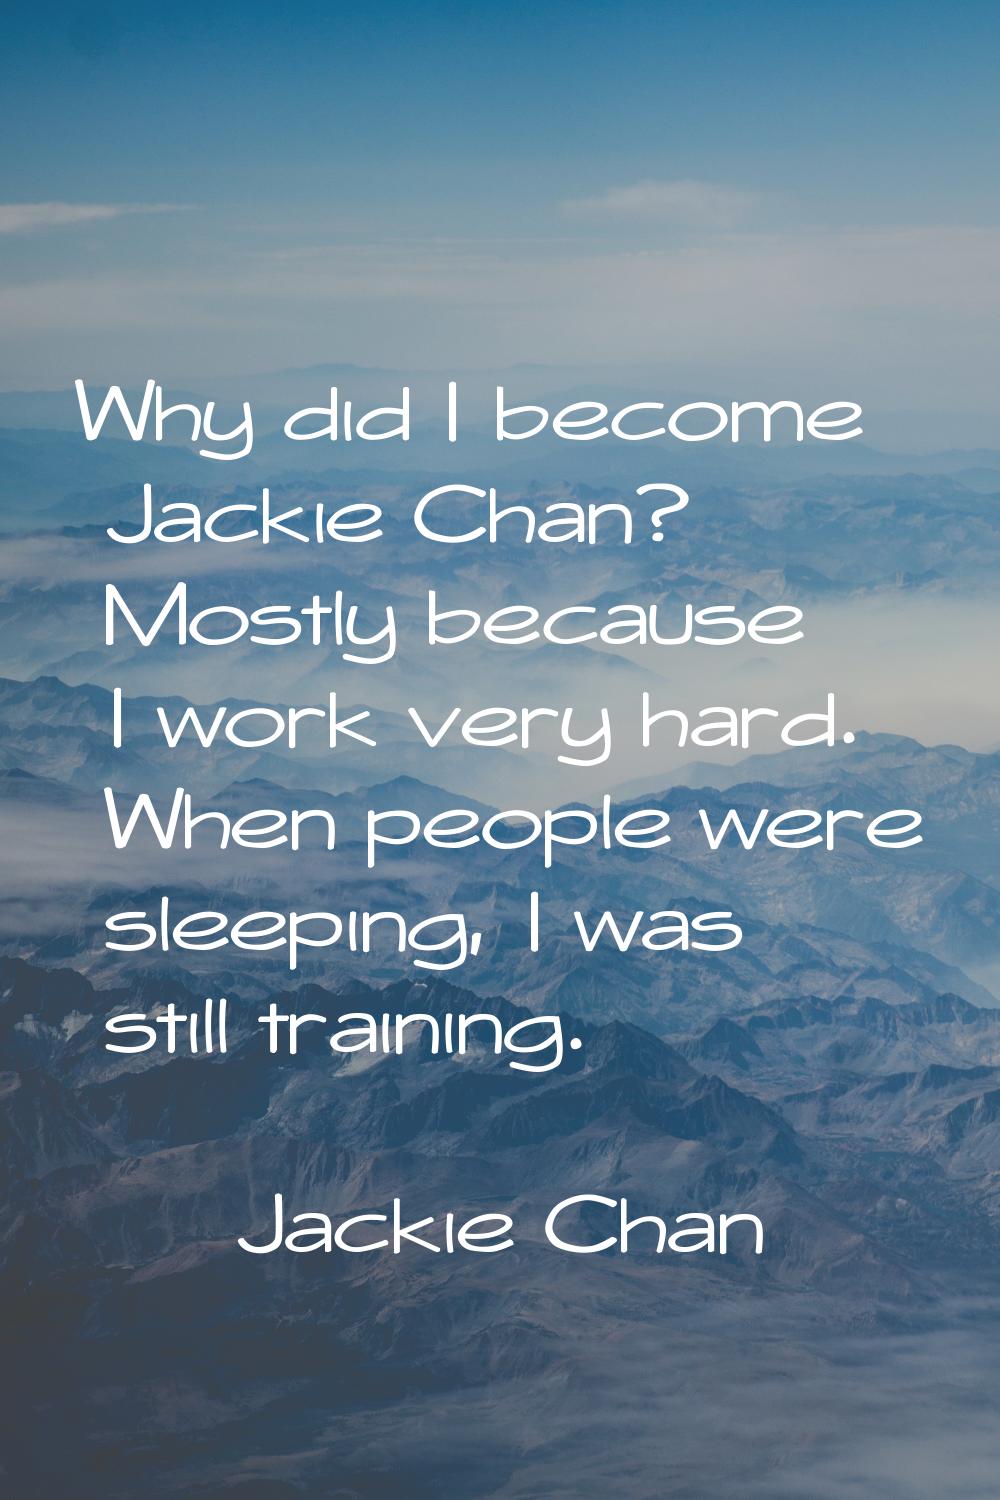 Why did I become Jackie Chan? Mostly because I work very hard. When people were sleeping, I was sti